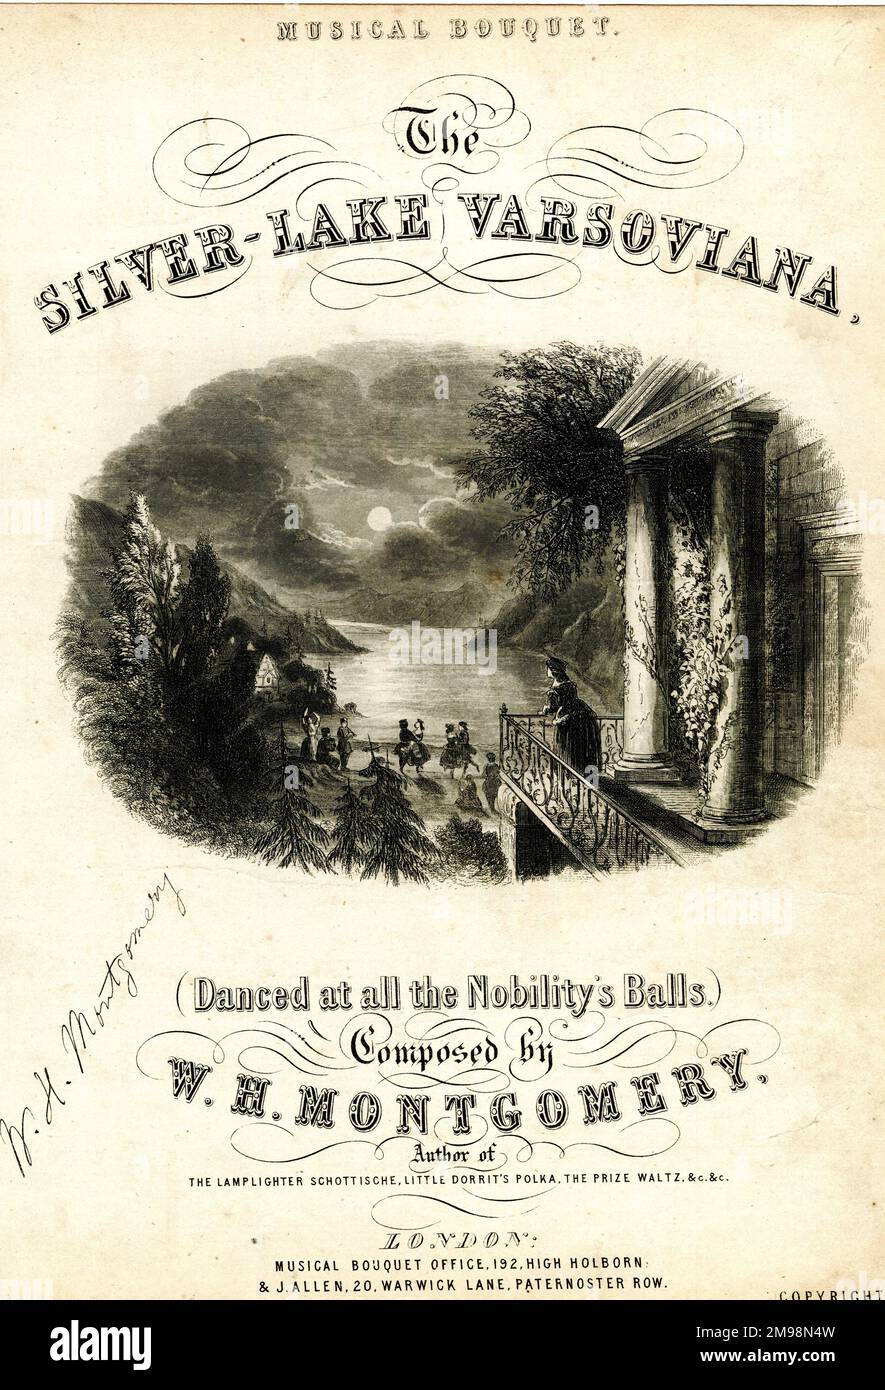 Music cover, The Silver-Lake Varsoviana, composed by W H Montgomery, danced at all the Nobility's Balls. Stock Photo